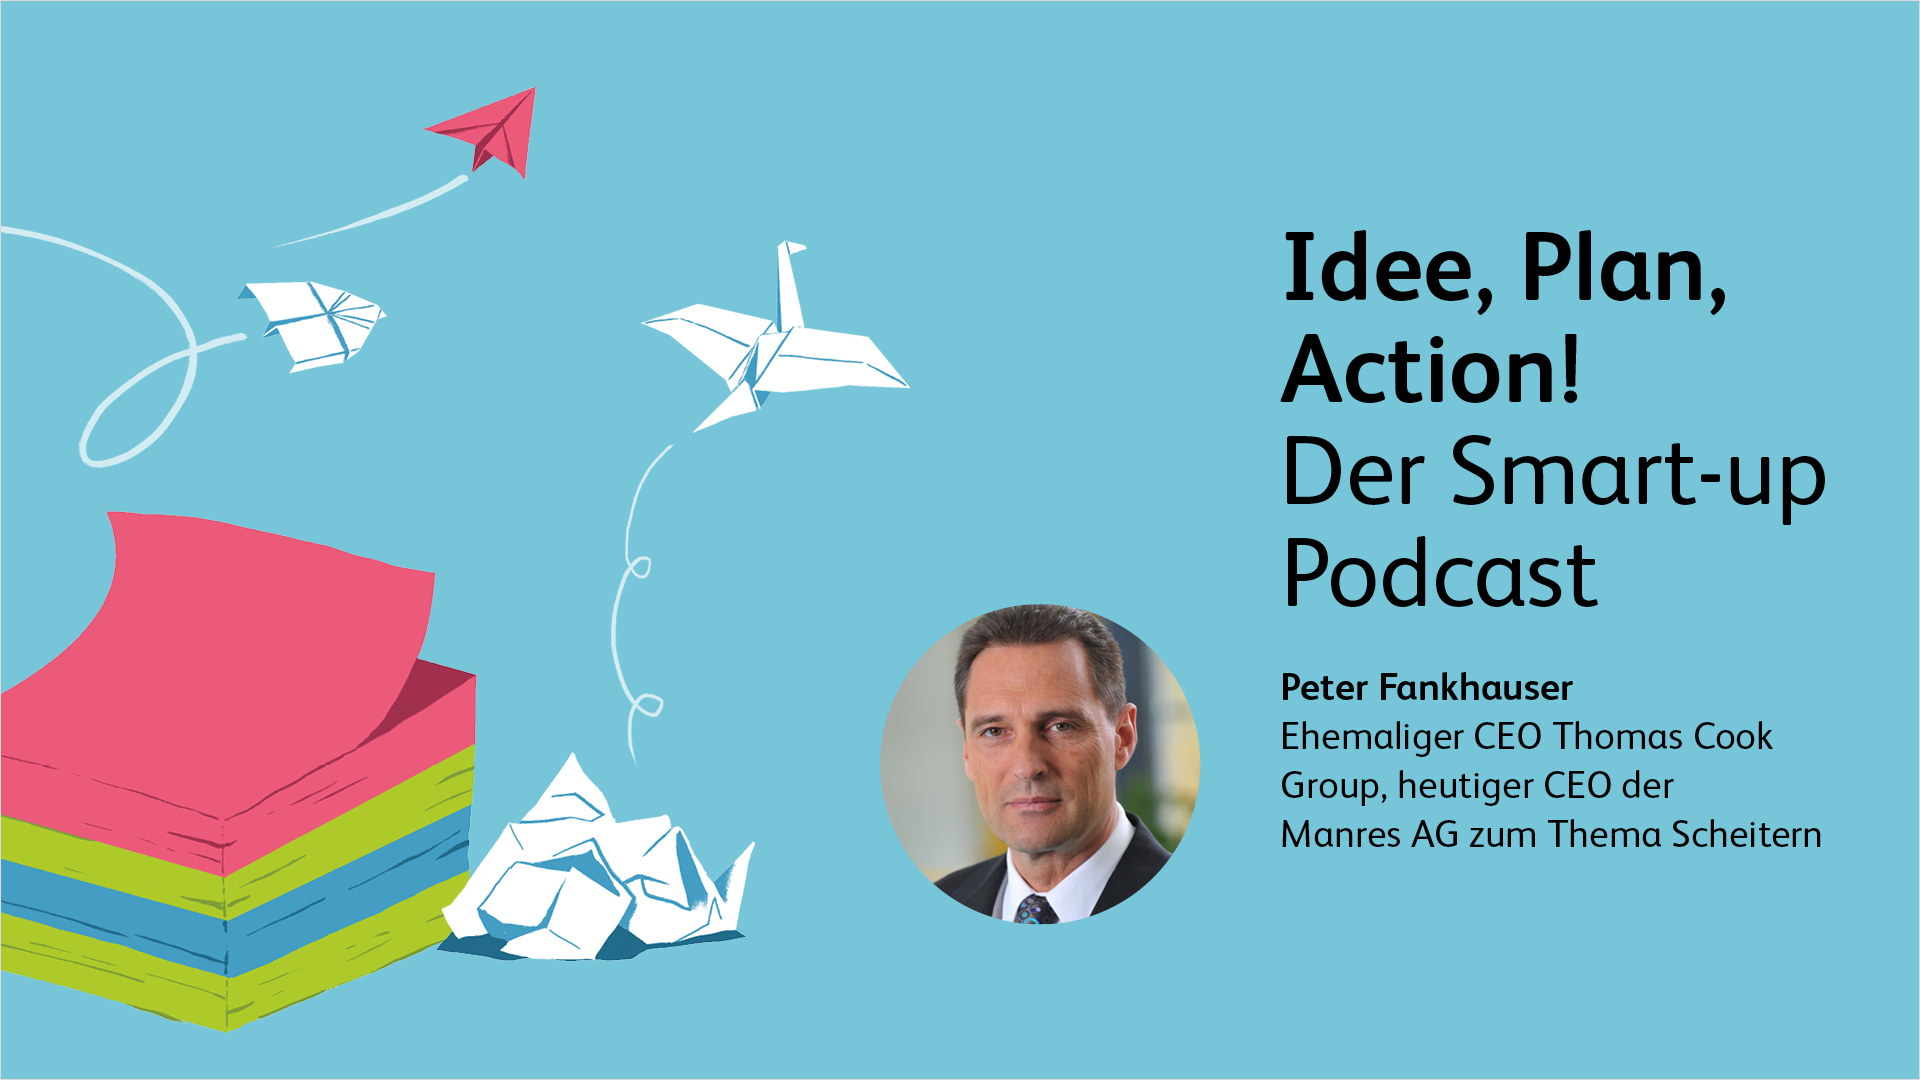 Neue Podcast-Folge mit Peter Fankhauser, ehemaliger CEO Thomas Cook Group